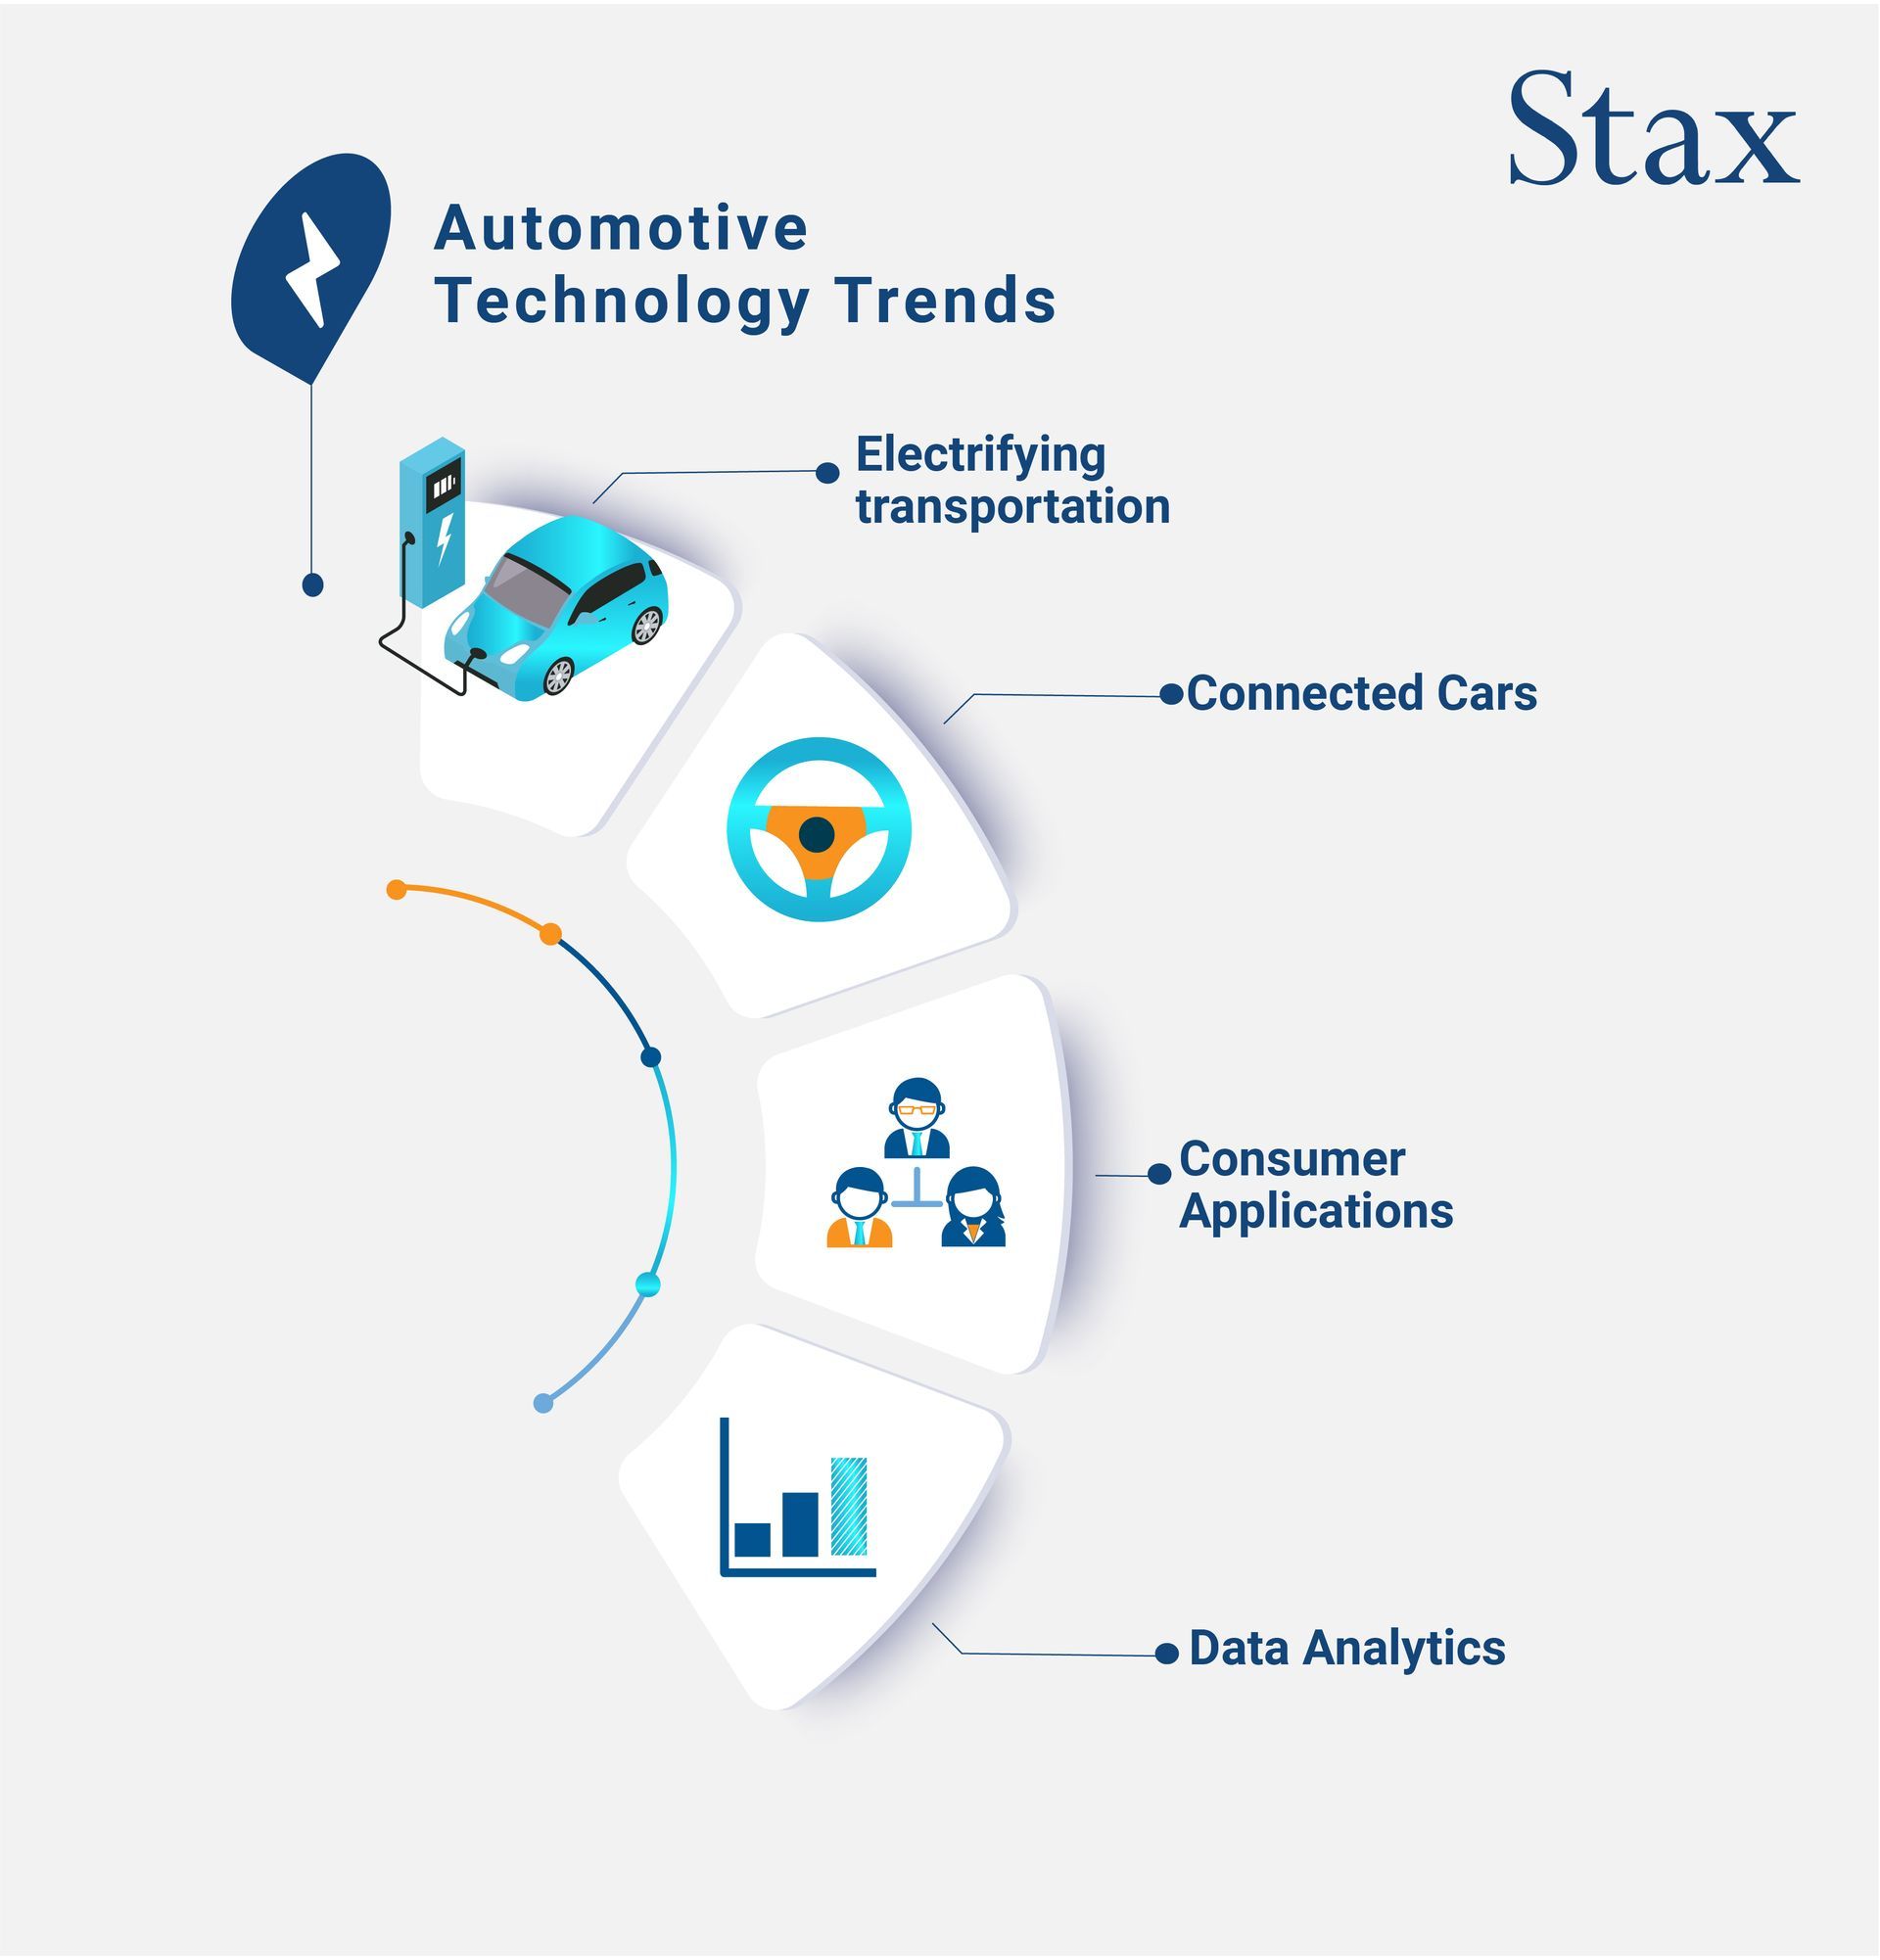 An infographic or diagram visualizing four automotive technology trends such as, electrifying transportation, connected cars, consumer applications, and data analytics